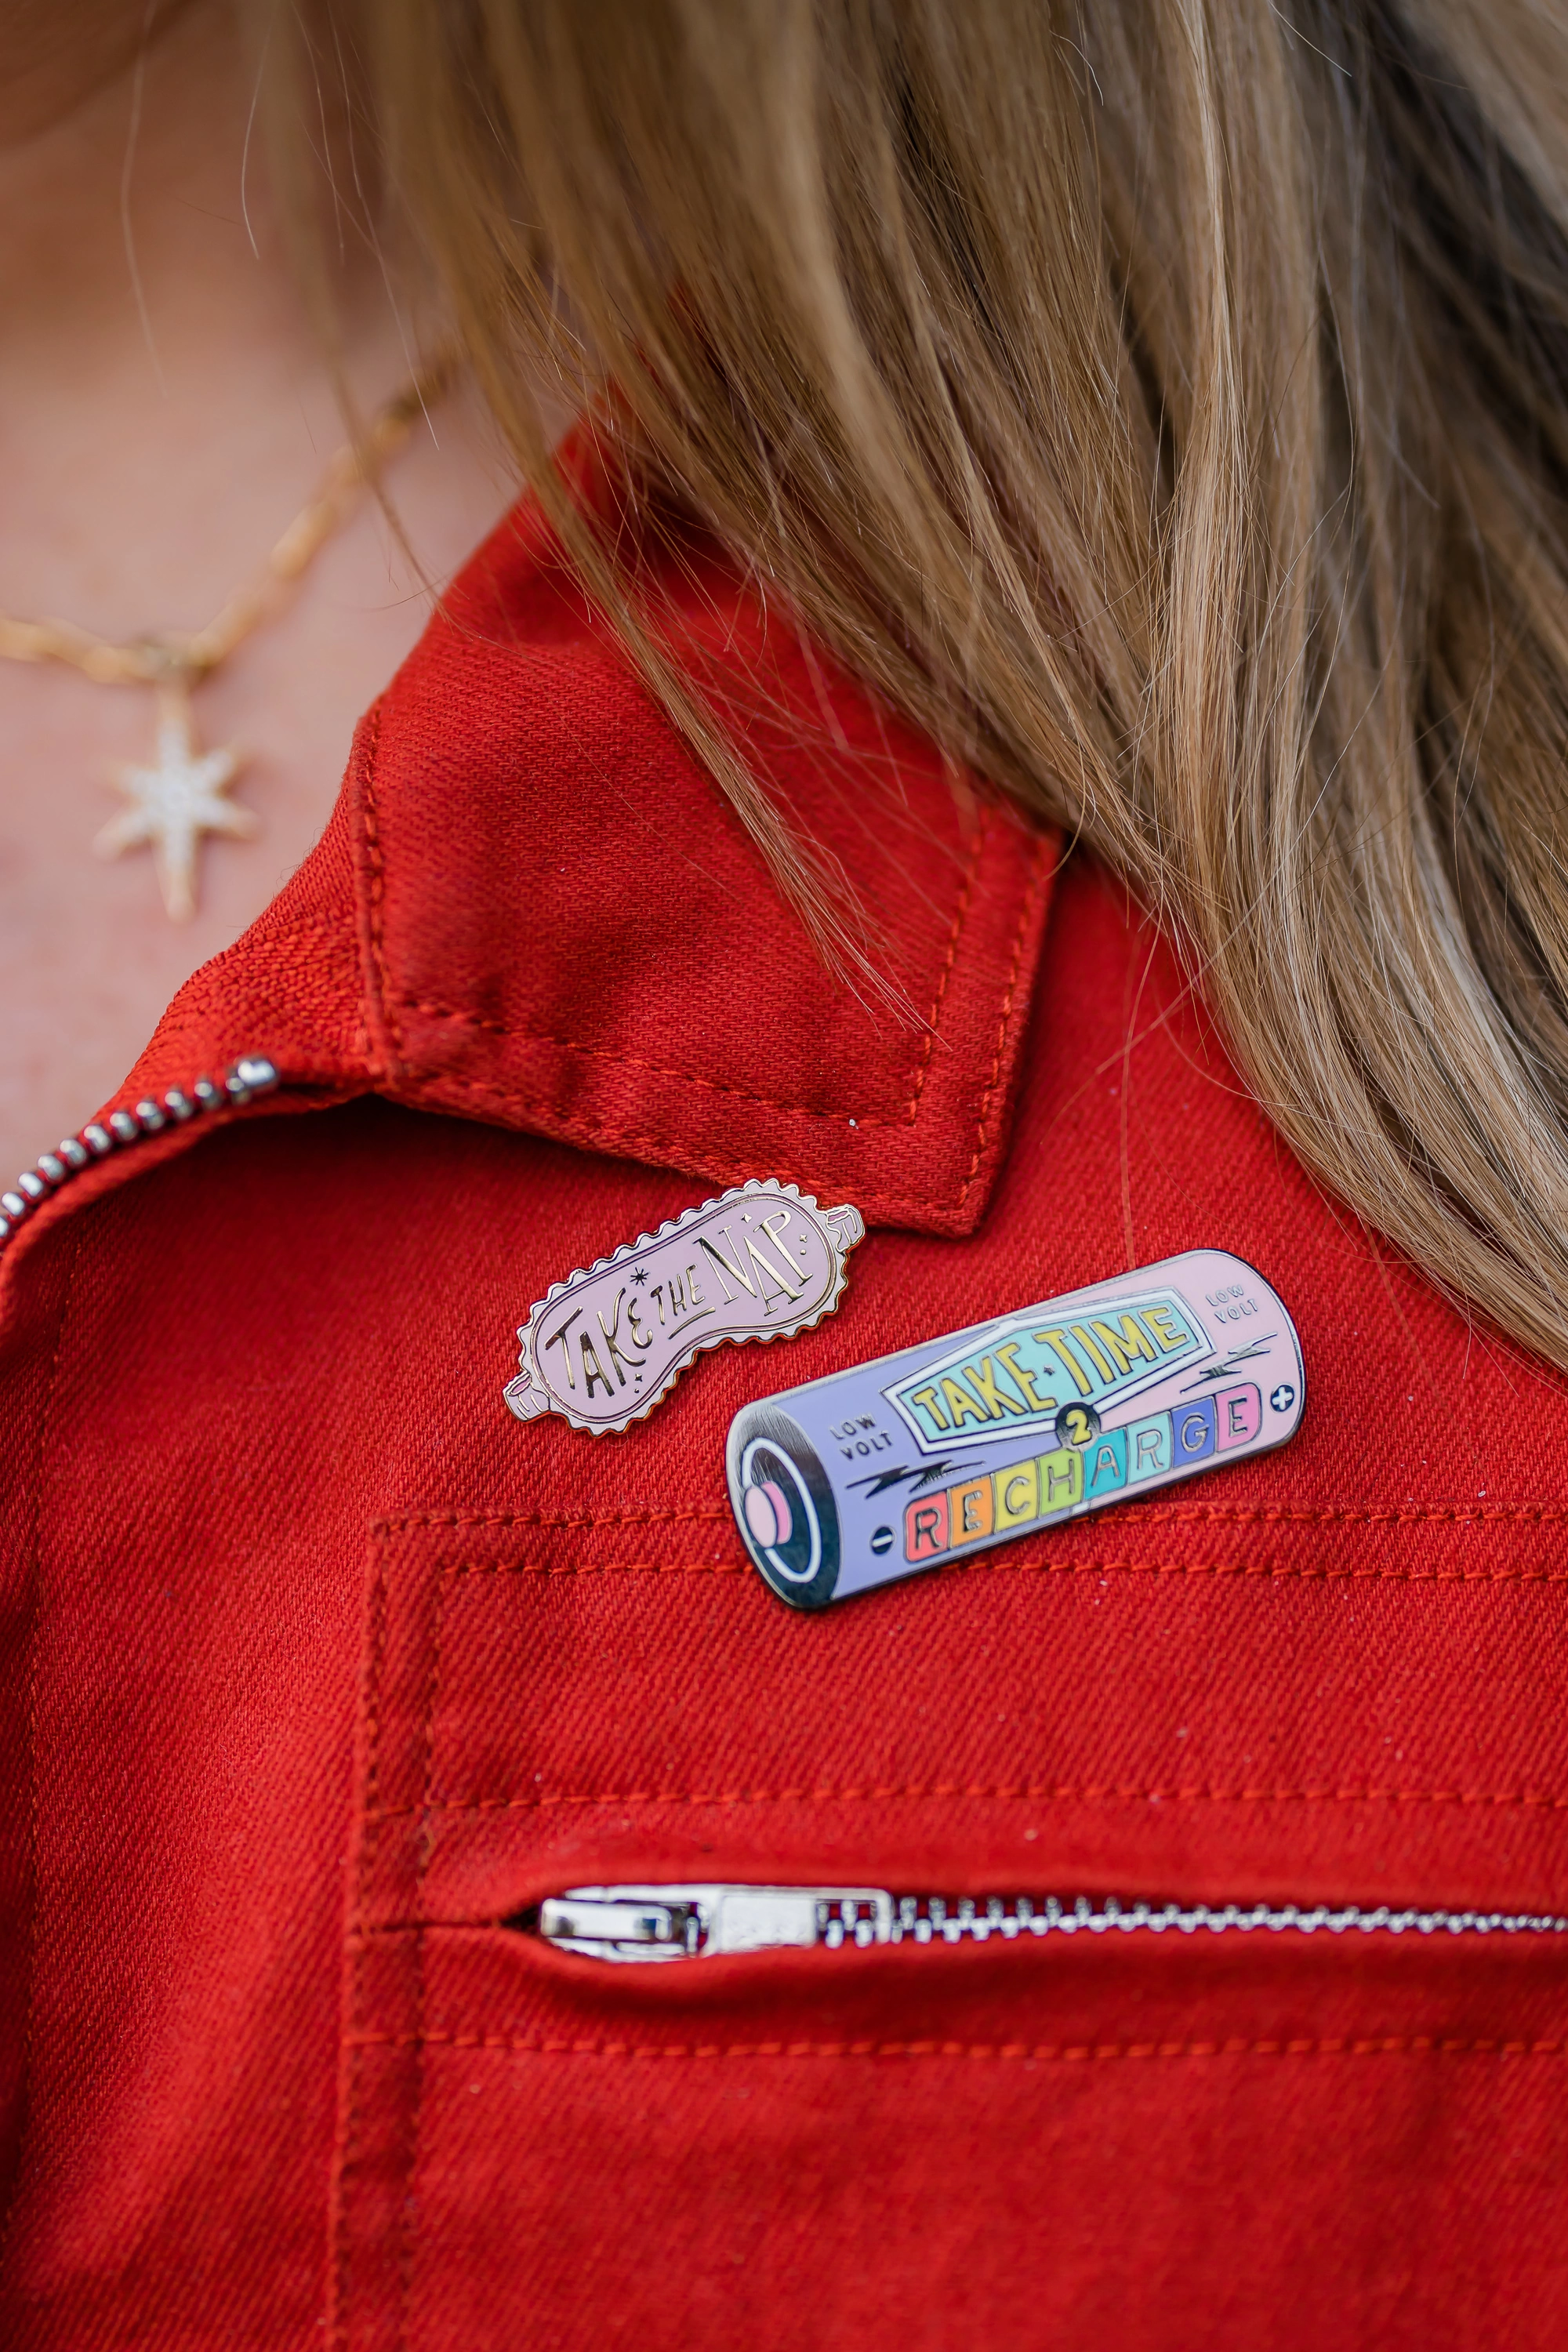 'Take time to recharge' and 'take the nap' pin badges